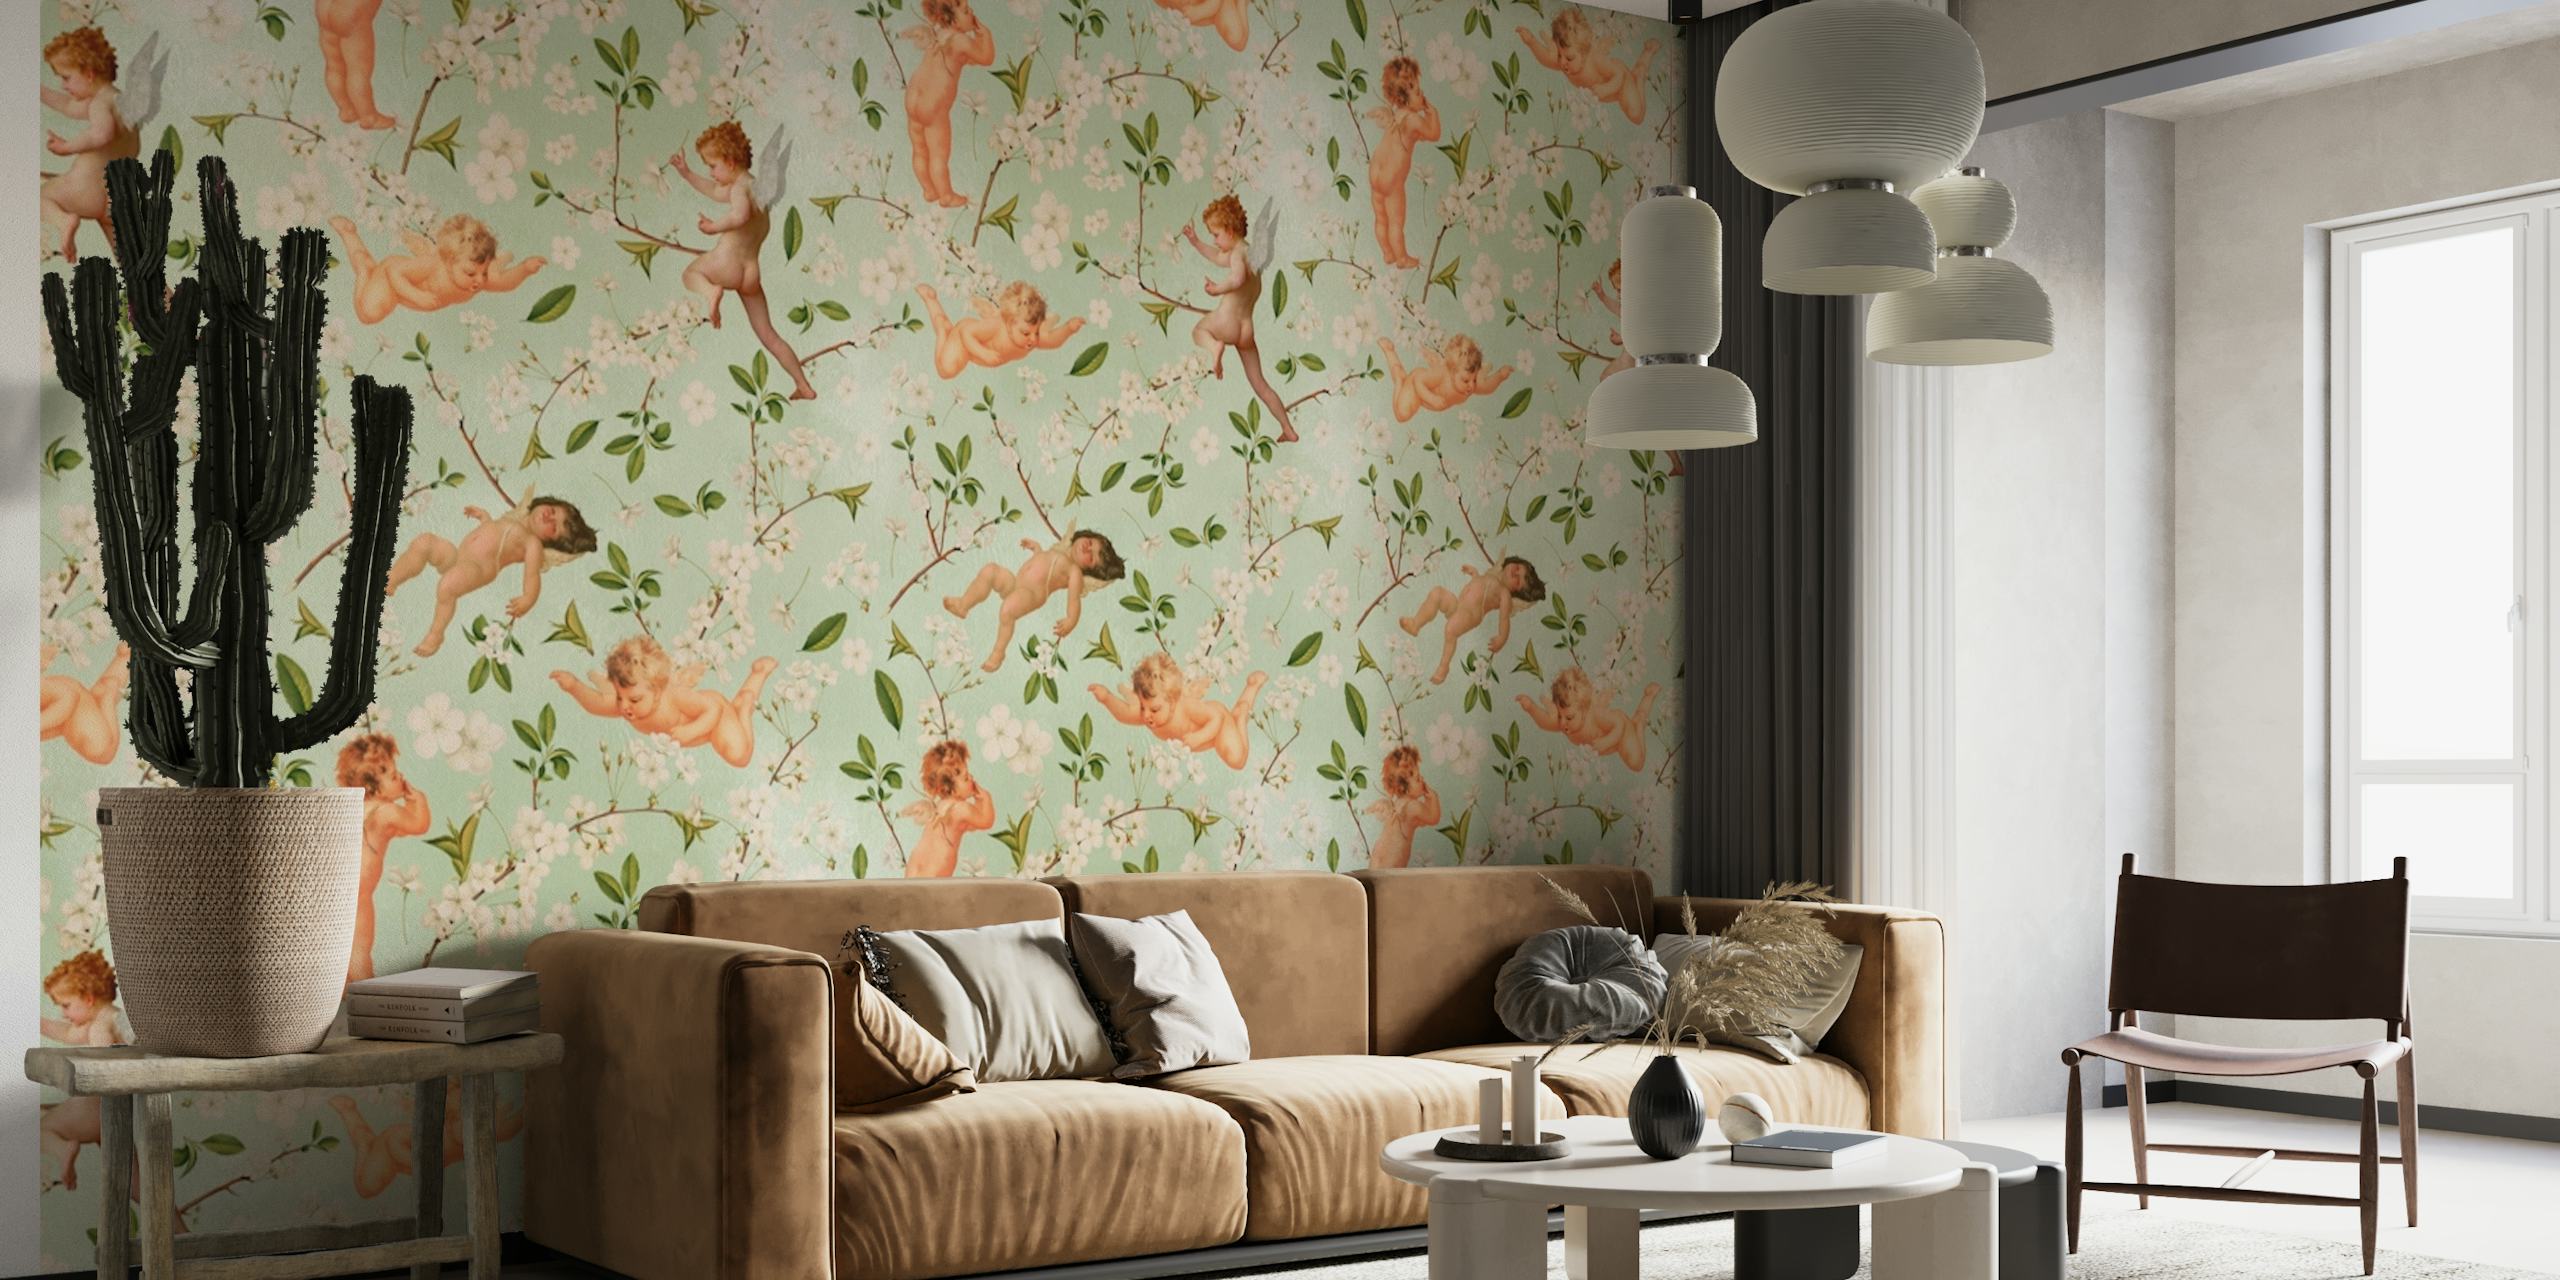 Cherry Blossoms and Cherubs wall mural depicting playful cherubs among soft pink flowers and green leaves.